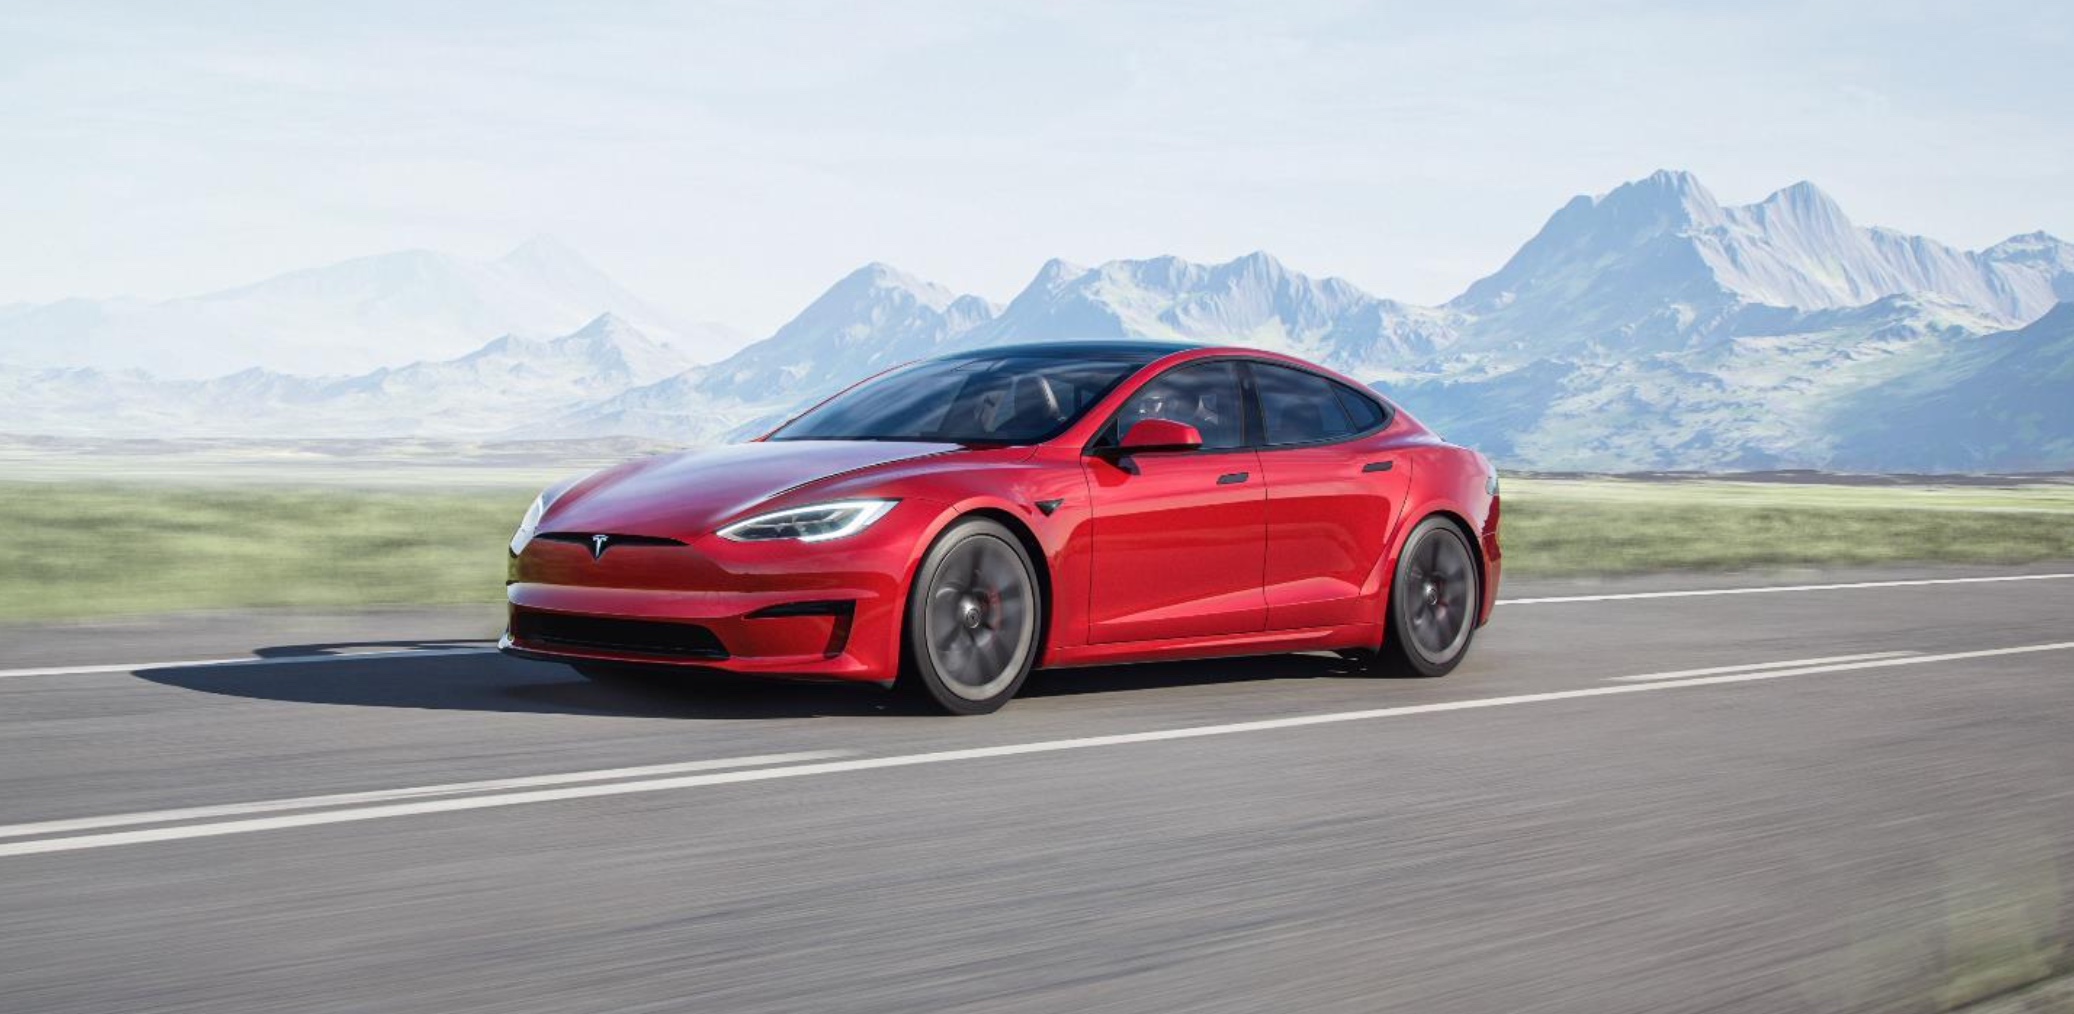 Tesla Model S Plaid becomes quickest car ever, sets stage for even more  insane Plaid+/Roadster